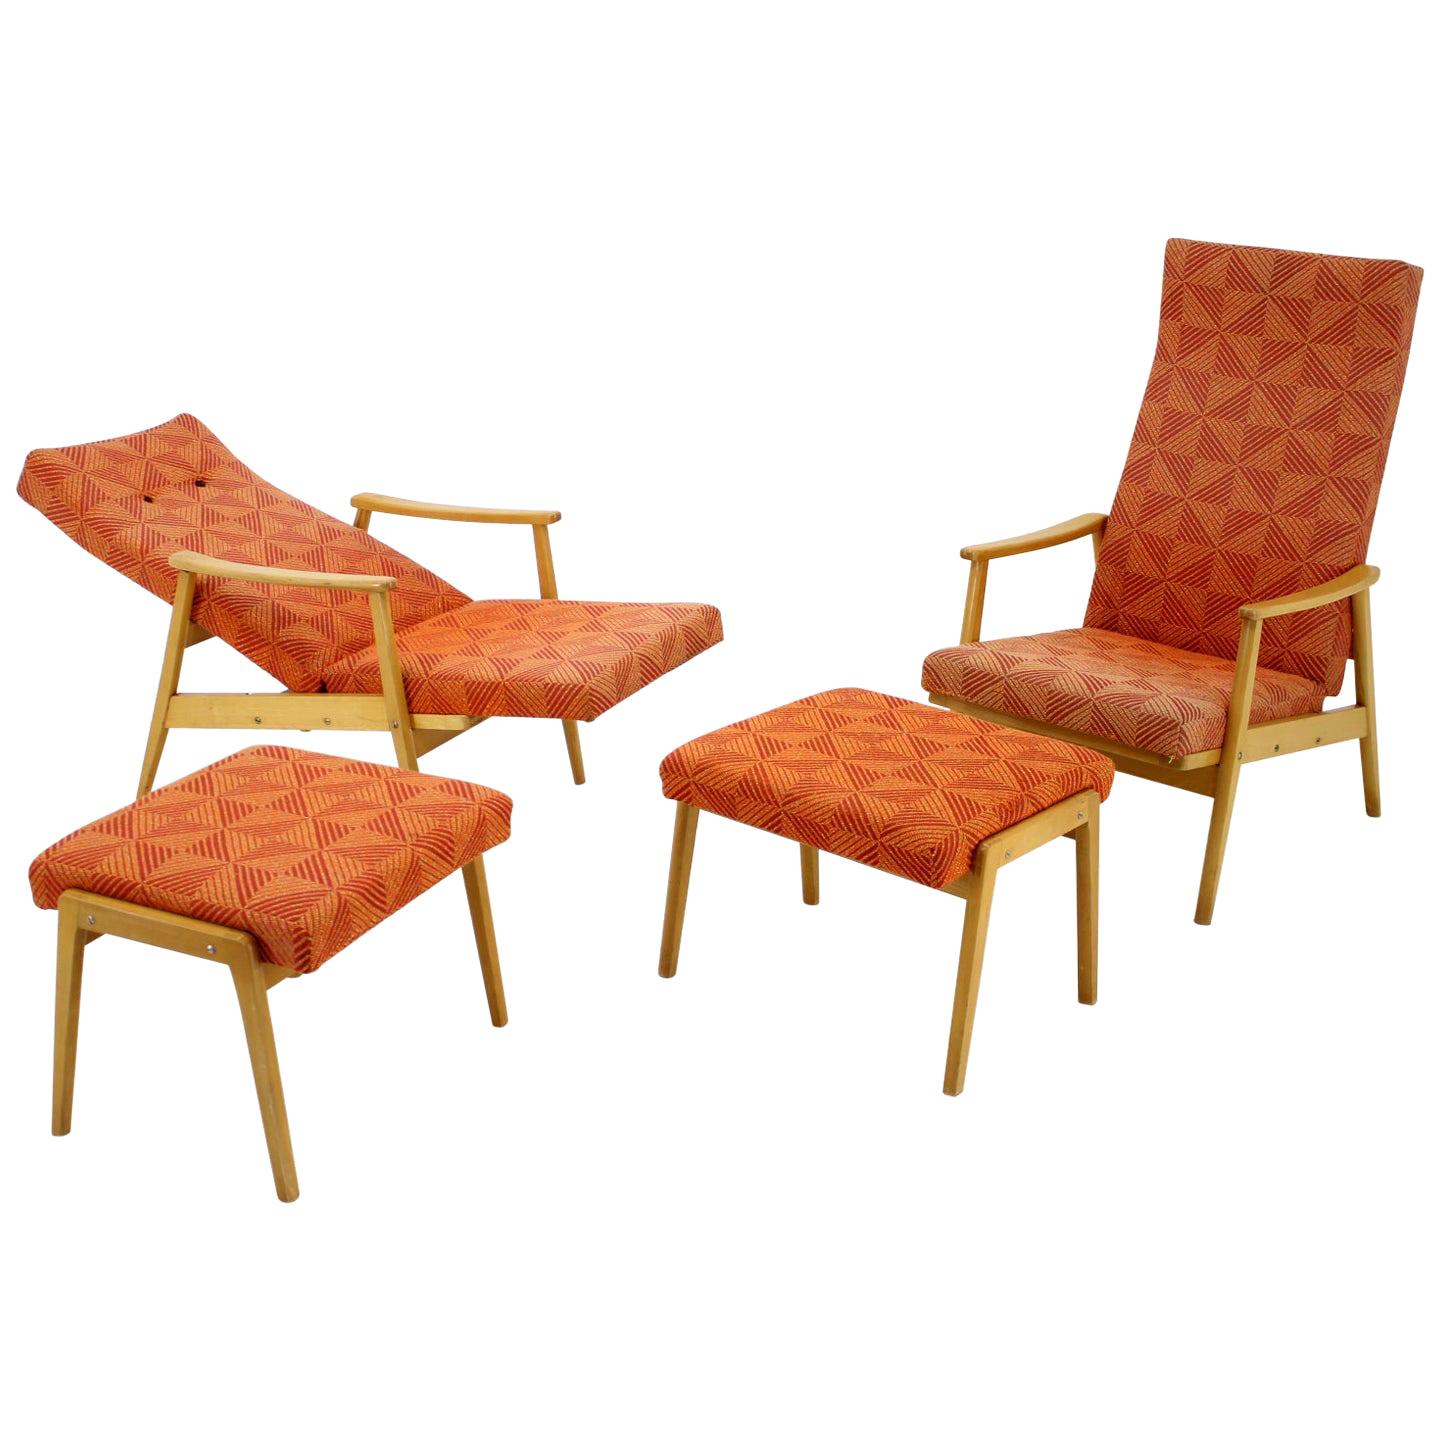 Set of Two Adjustable Armchairs with Footstools, Thon, 1970 For Sale